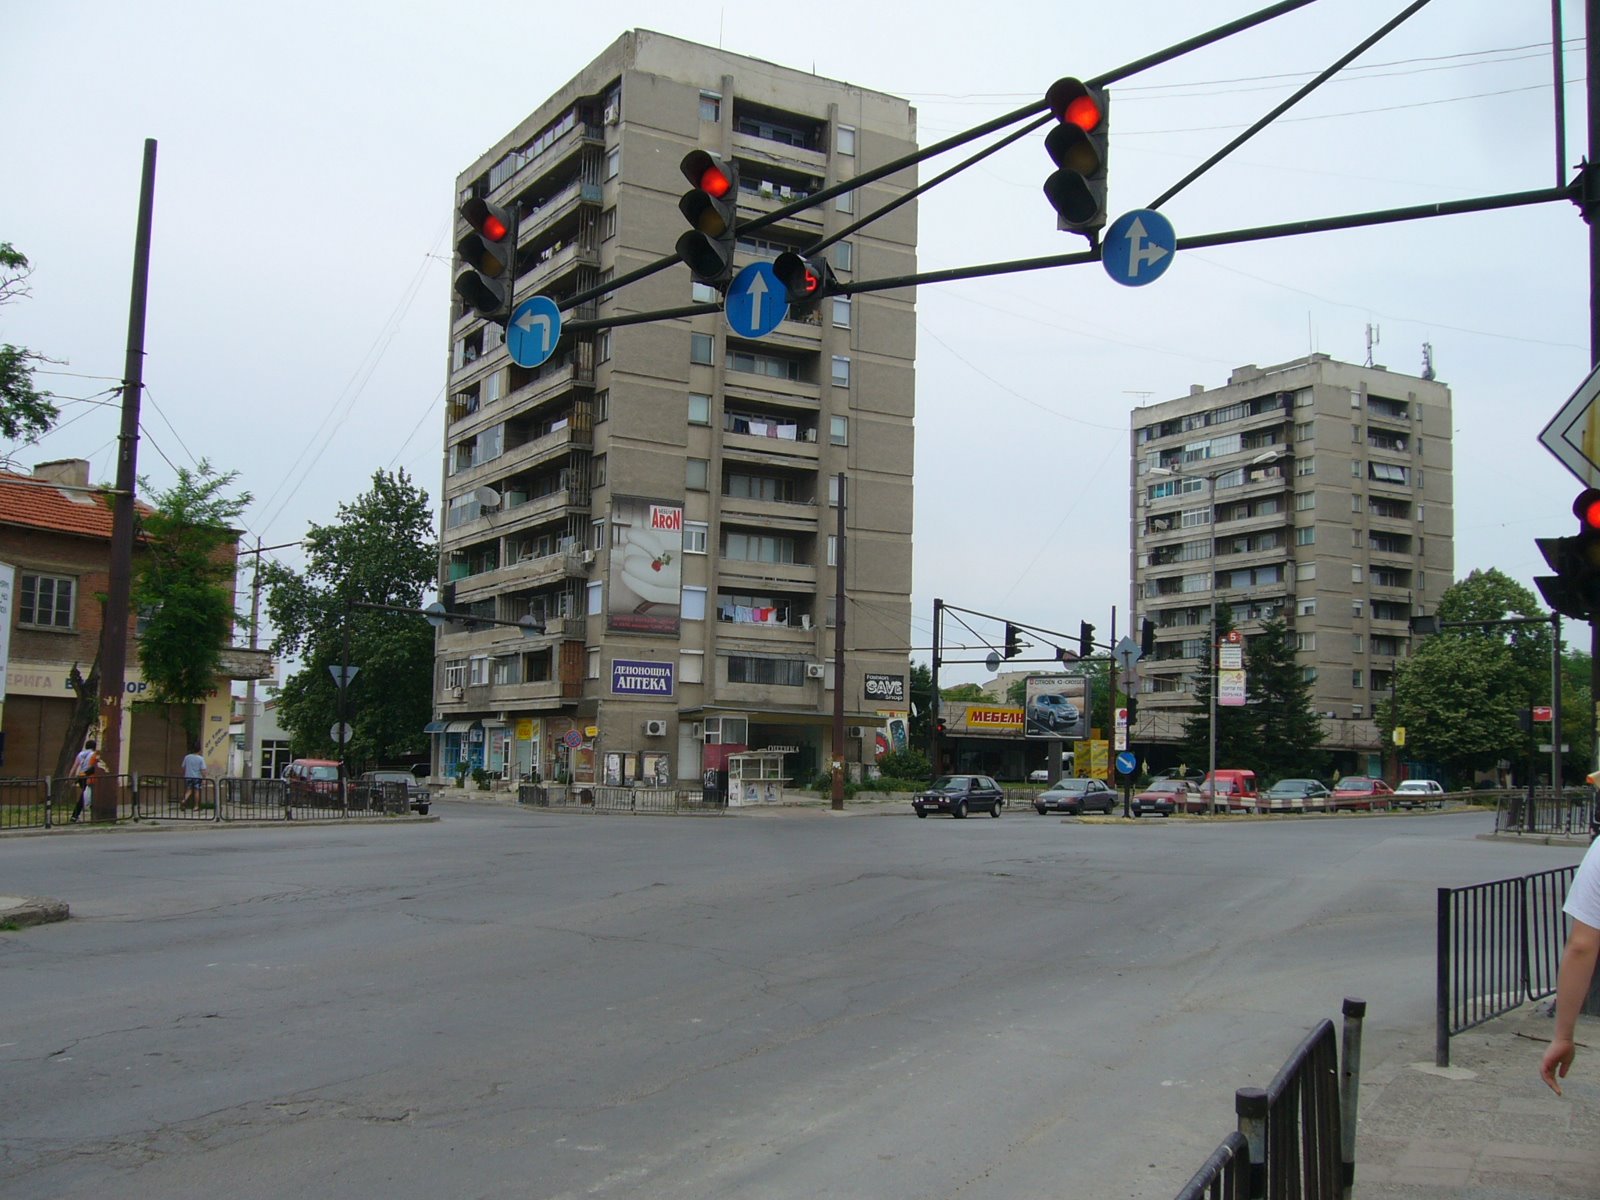 North Road Junction